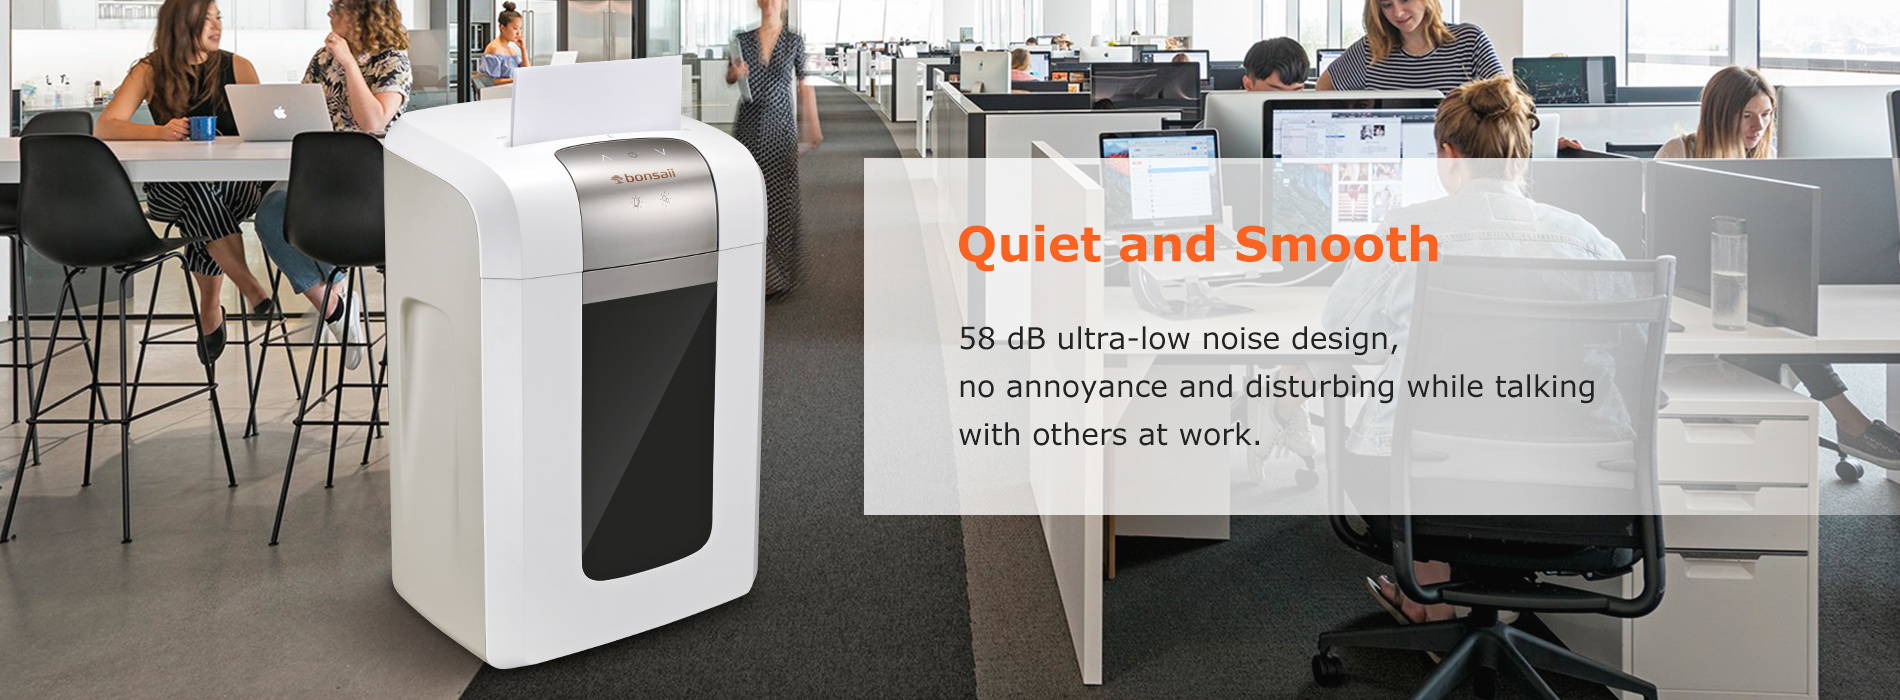 Quiet and Smooth 58 dB ultra-low noise design, no annoyance and disturbing while talking with others at work.